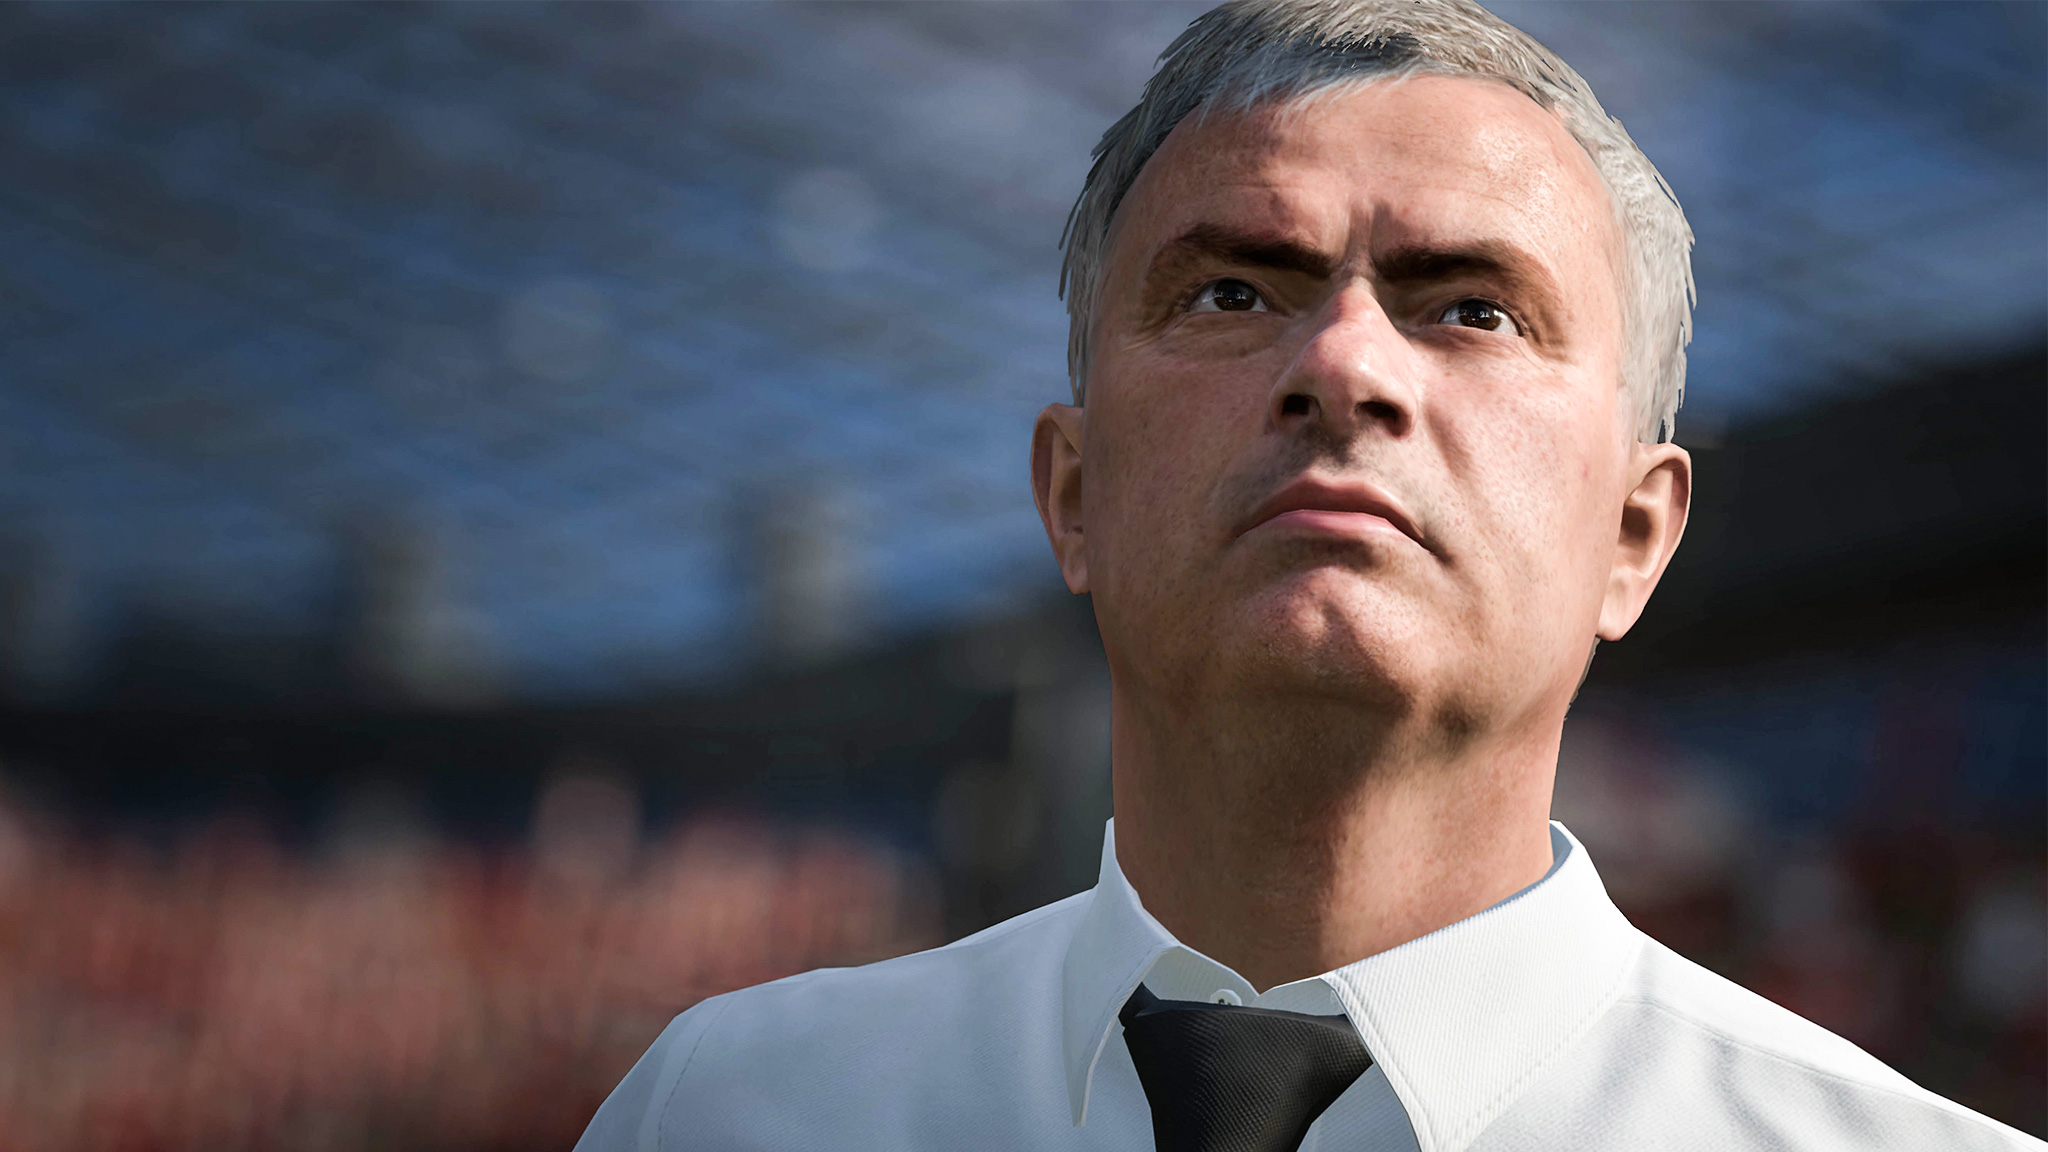 Mourinho is now in FIFA 17 along with all other 19 Premier League managers